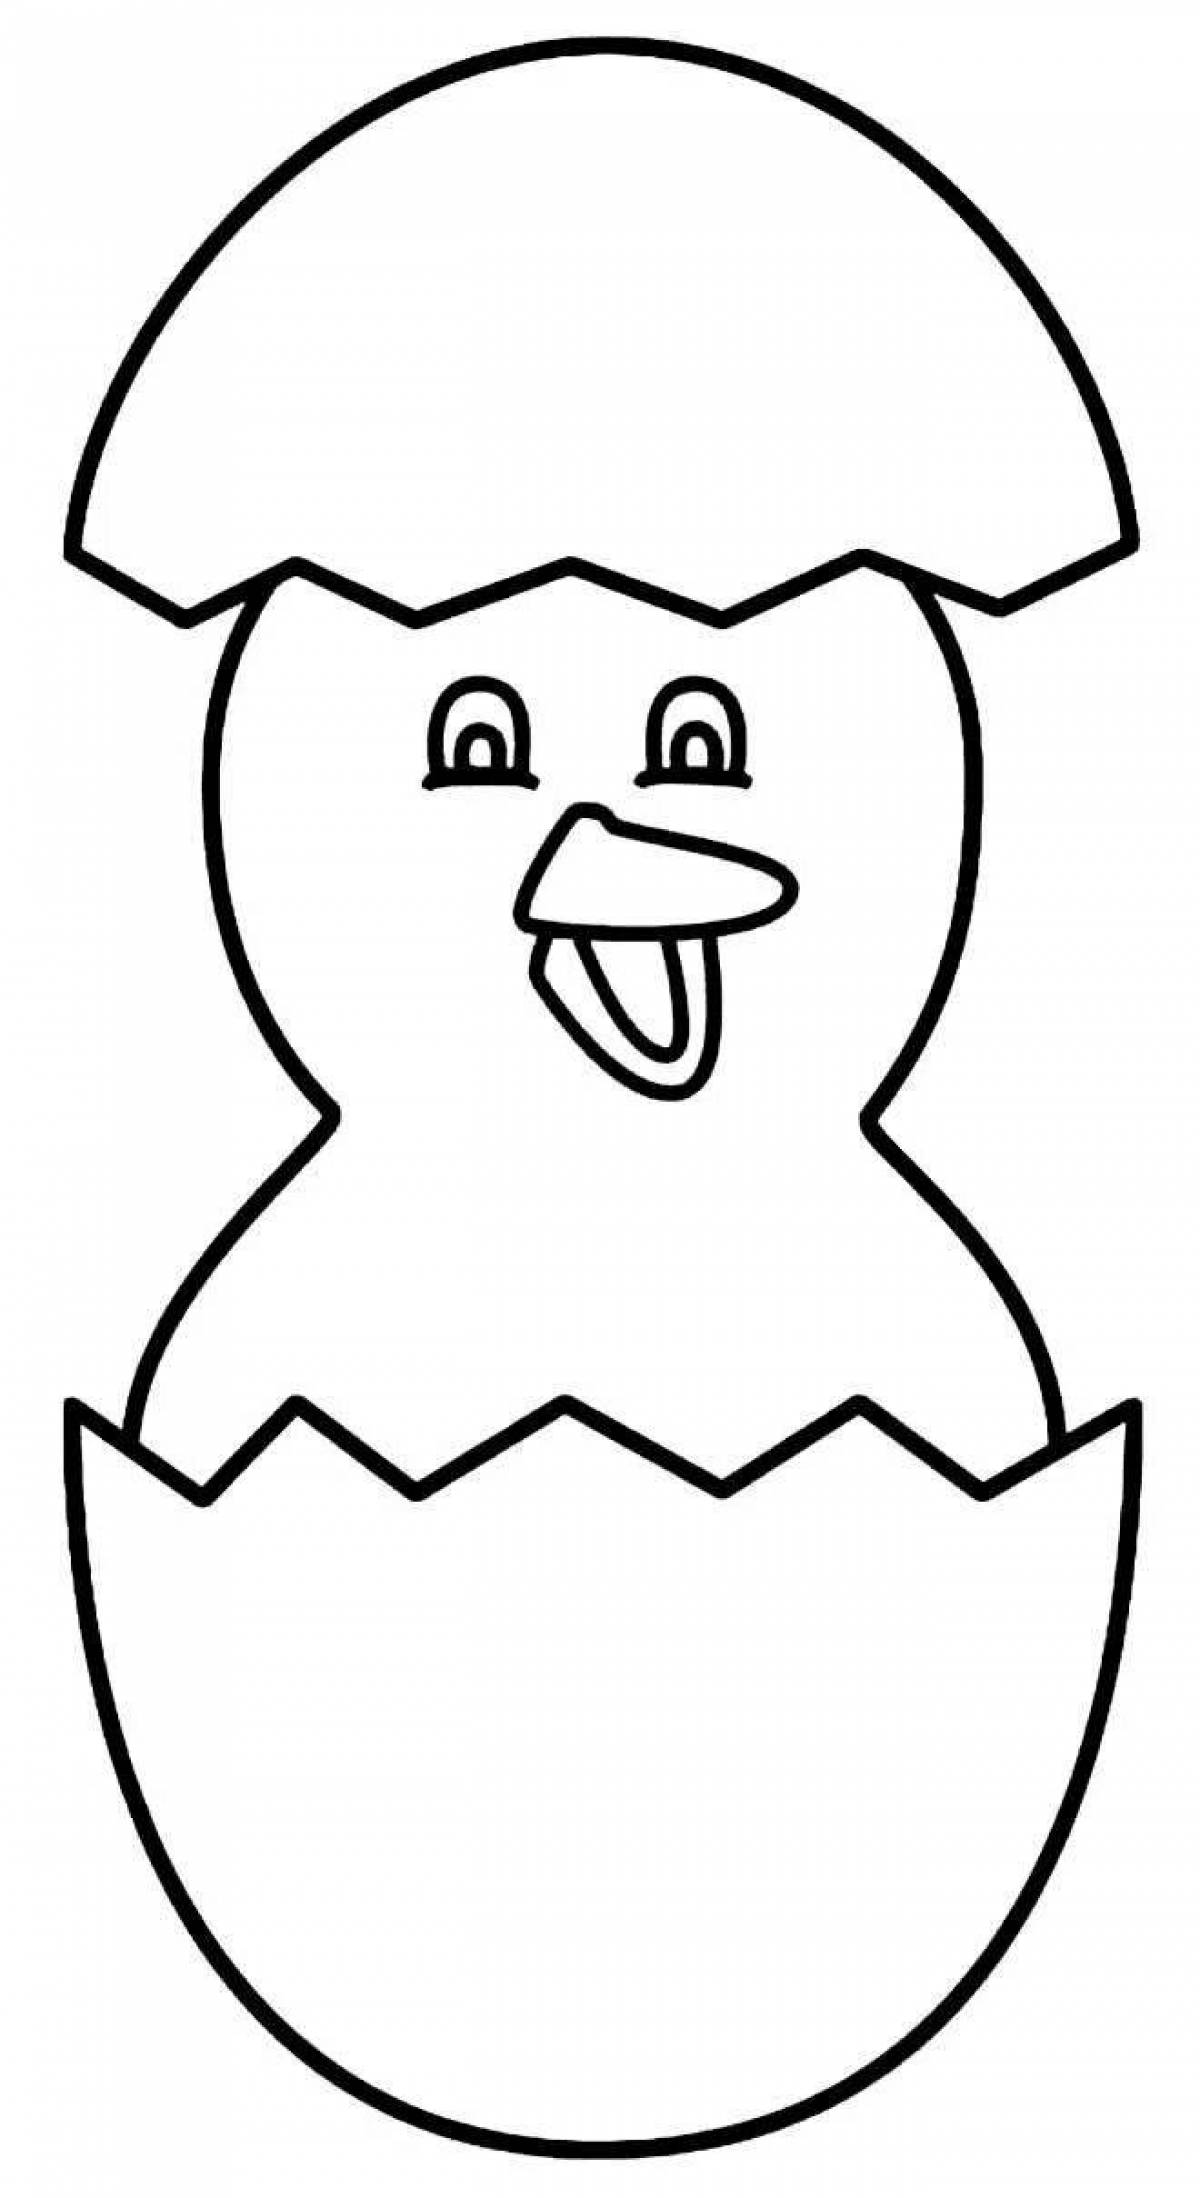 Coloring page fat chicken in the shell